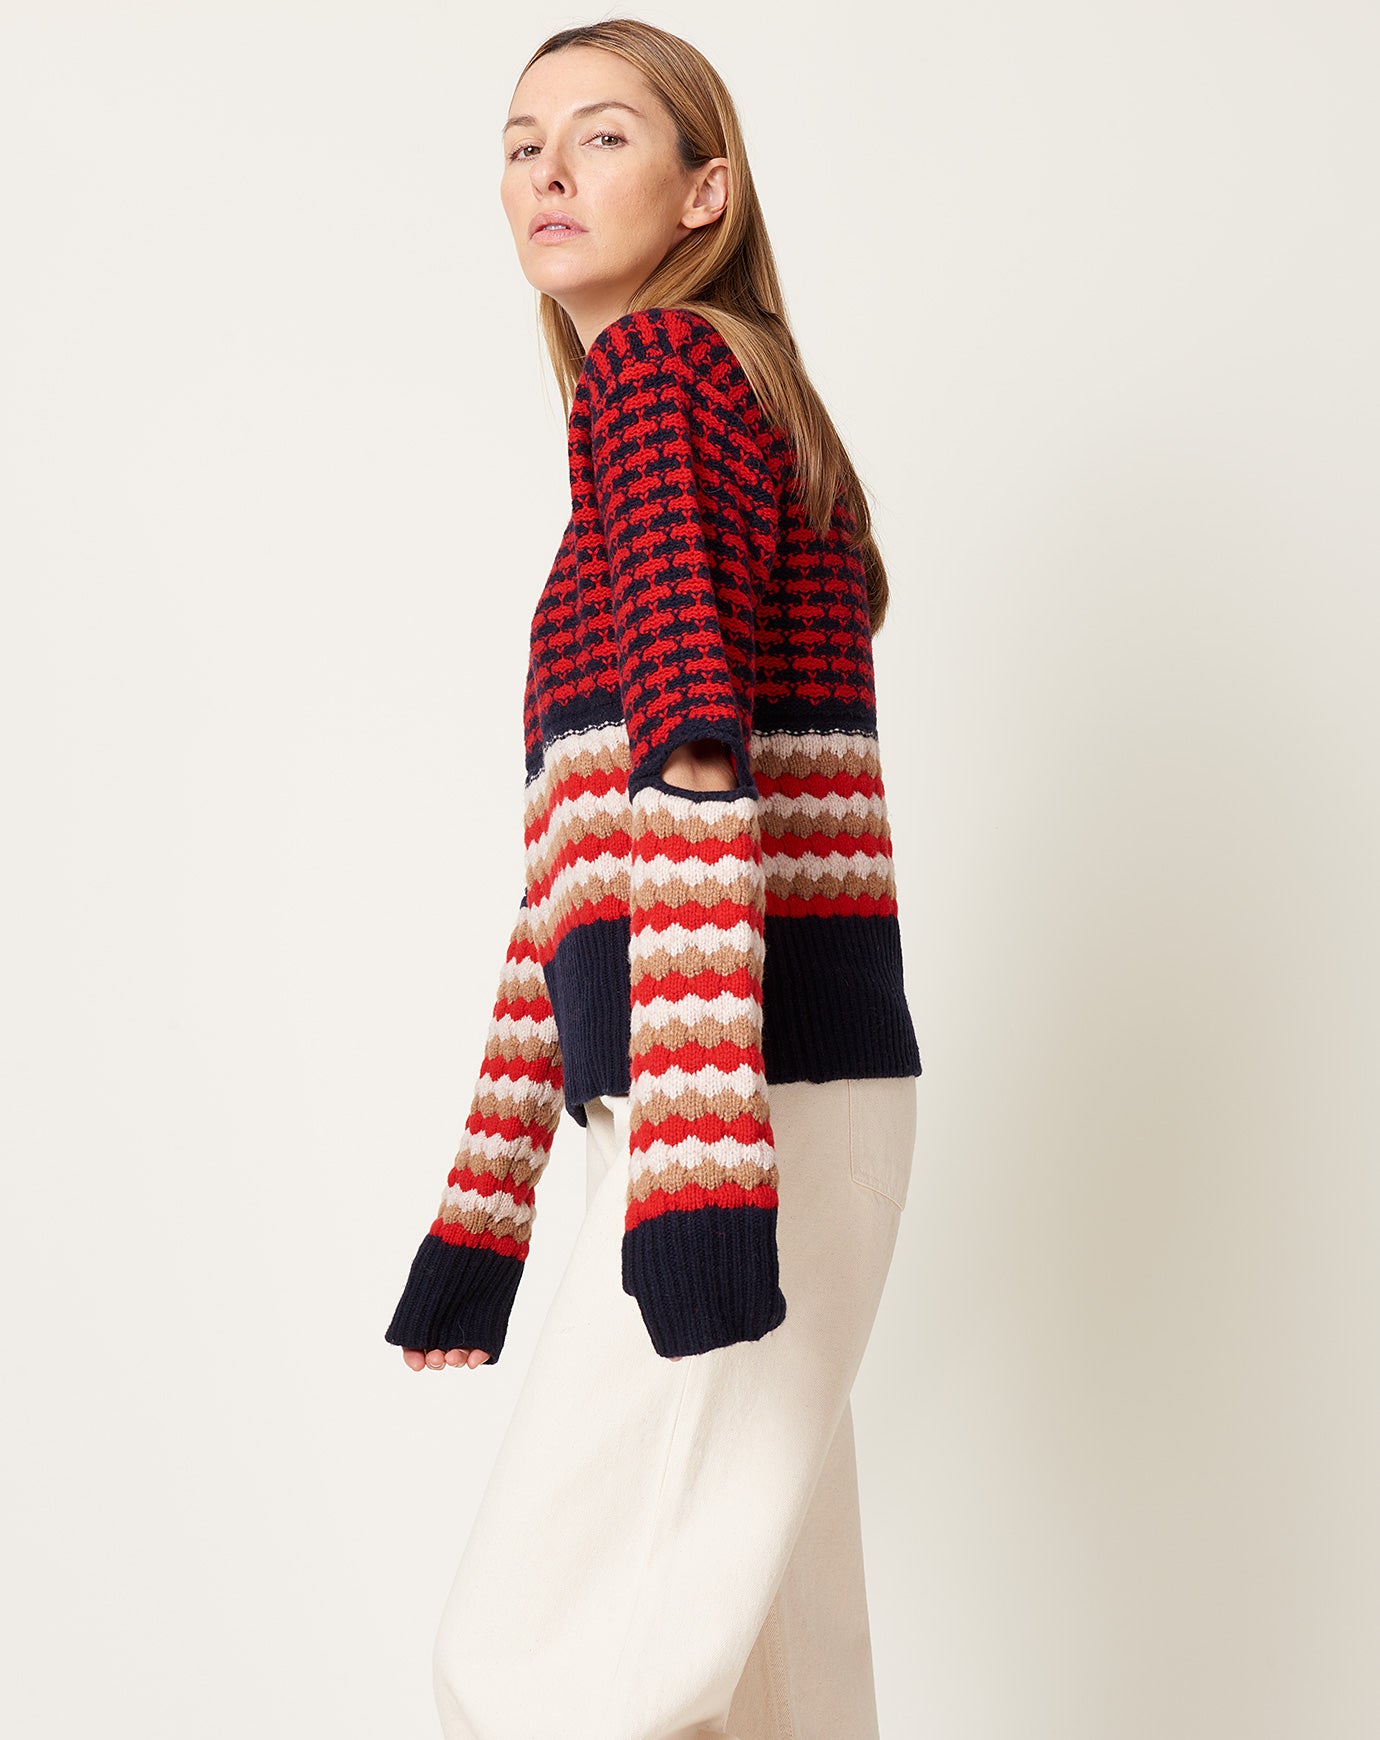 Babaco Patterned Knit Pullover in Navy & Red